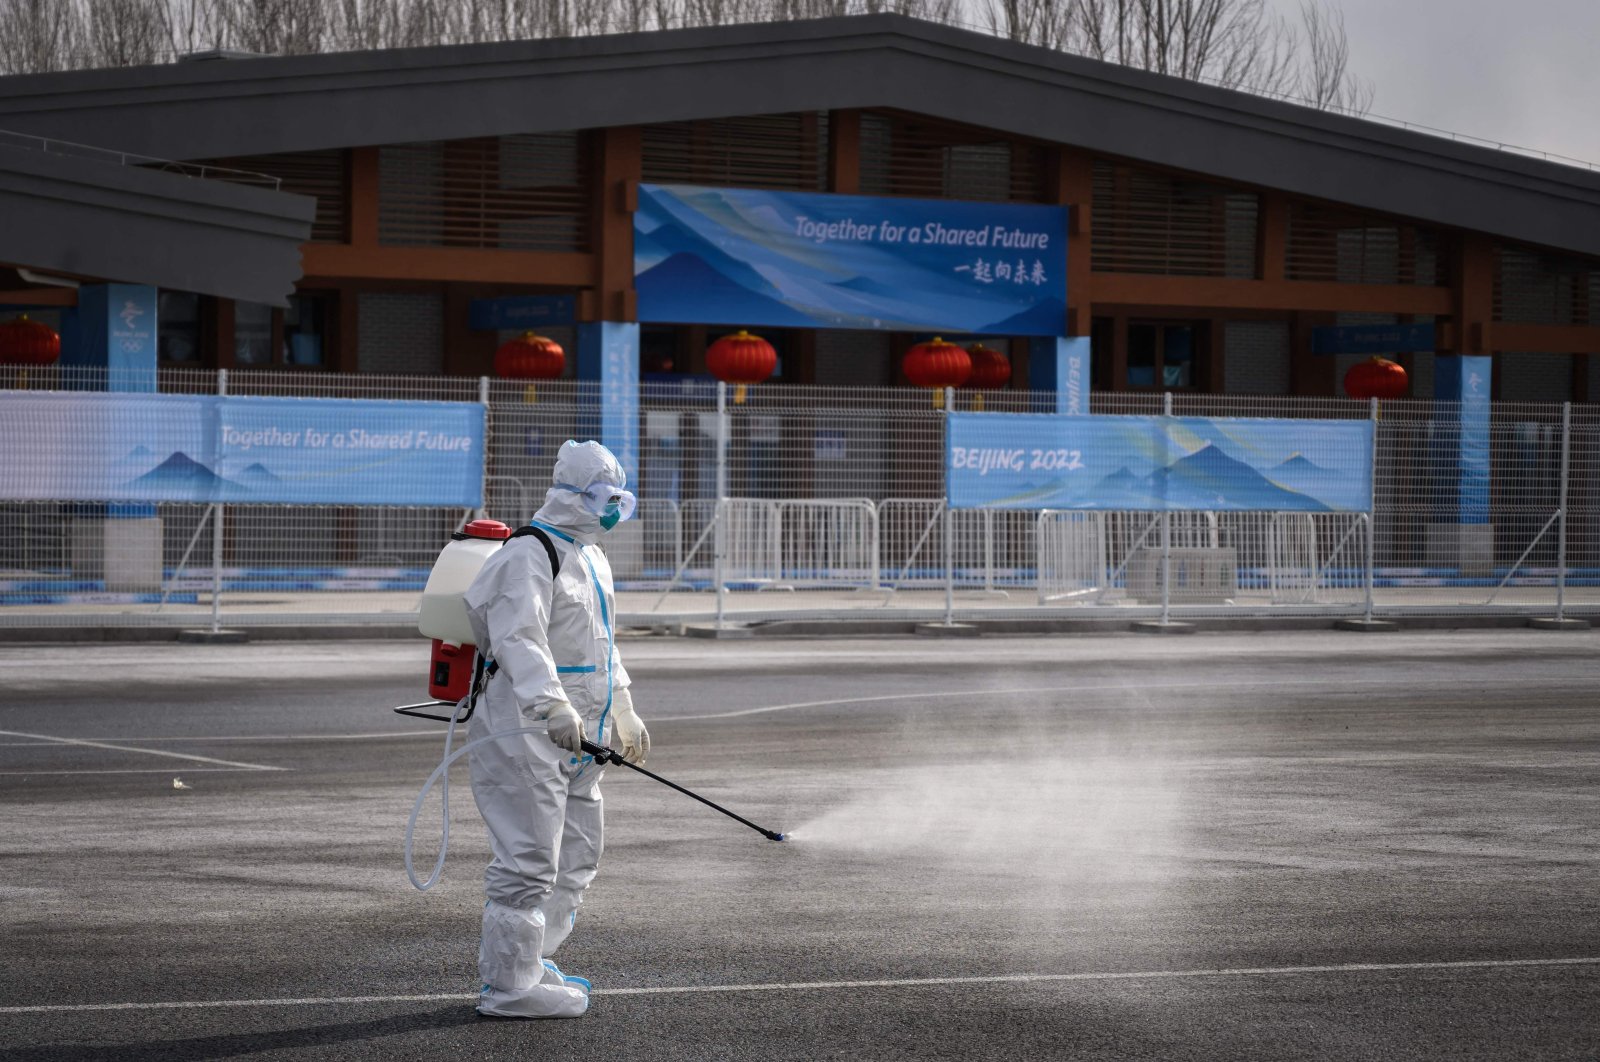 A man in hazmat suit sprays disinfectant against COVID-19 near a Winter Olympics venue, Beijing, China, Jan. 31, 2022. (AFP Photo)